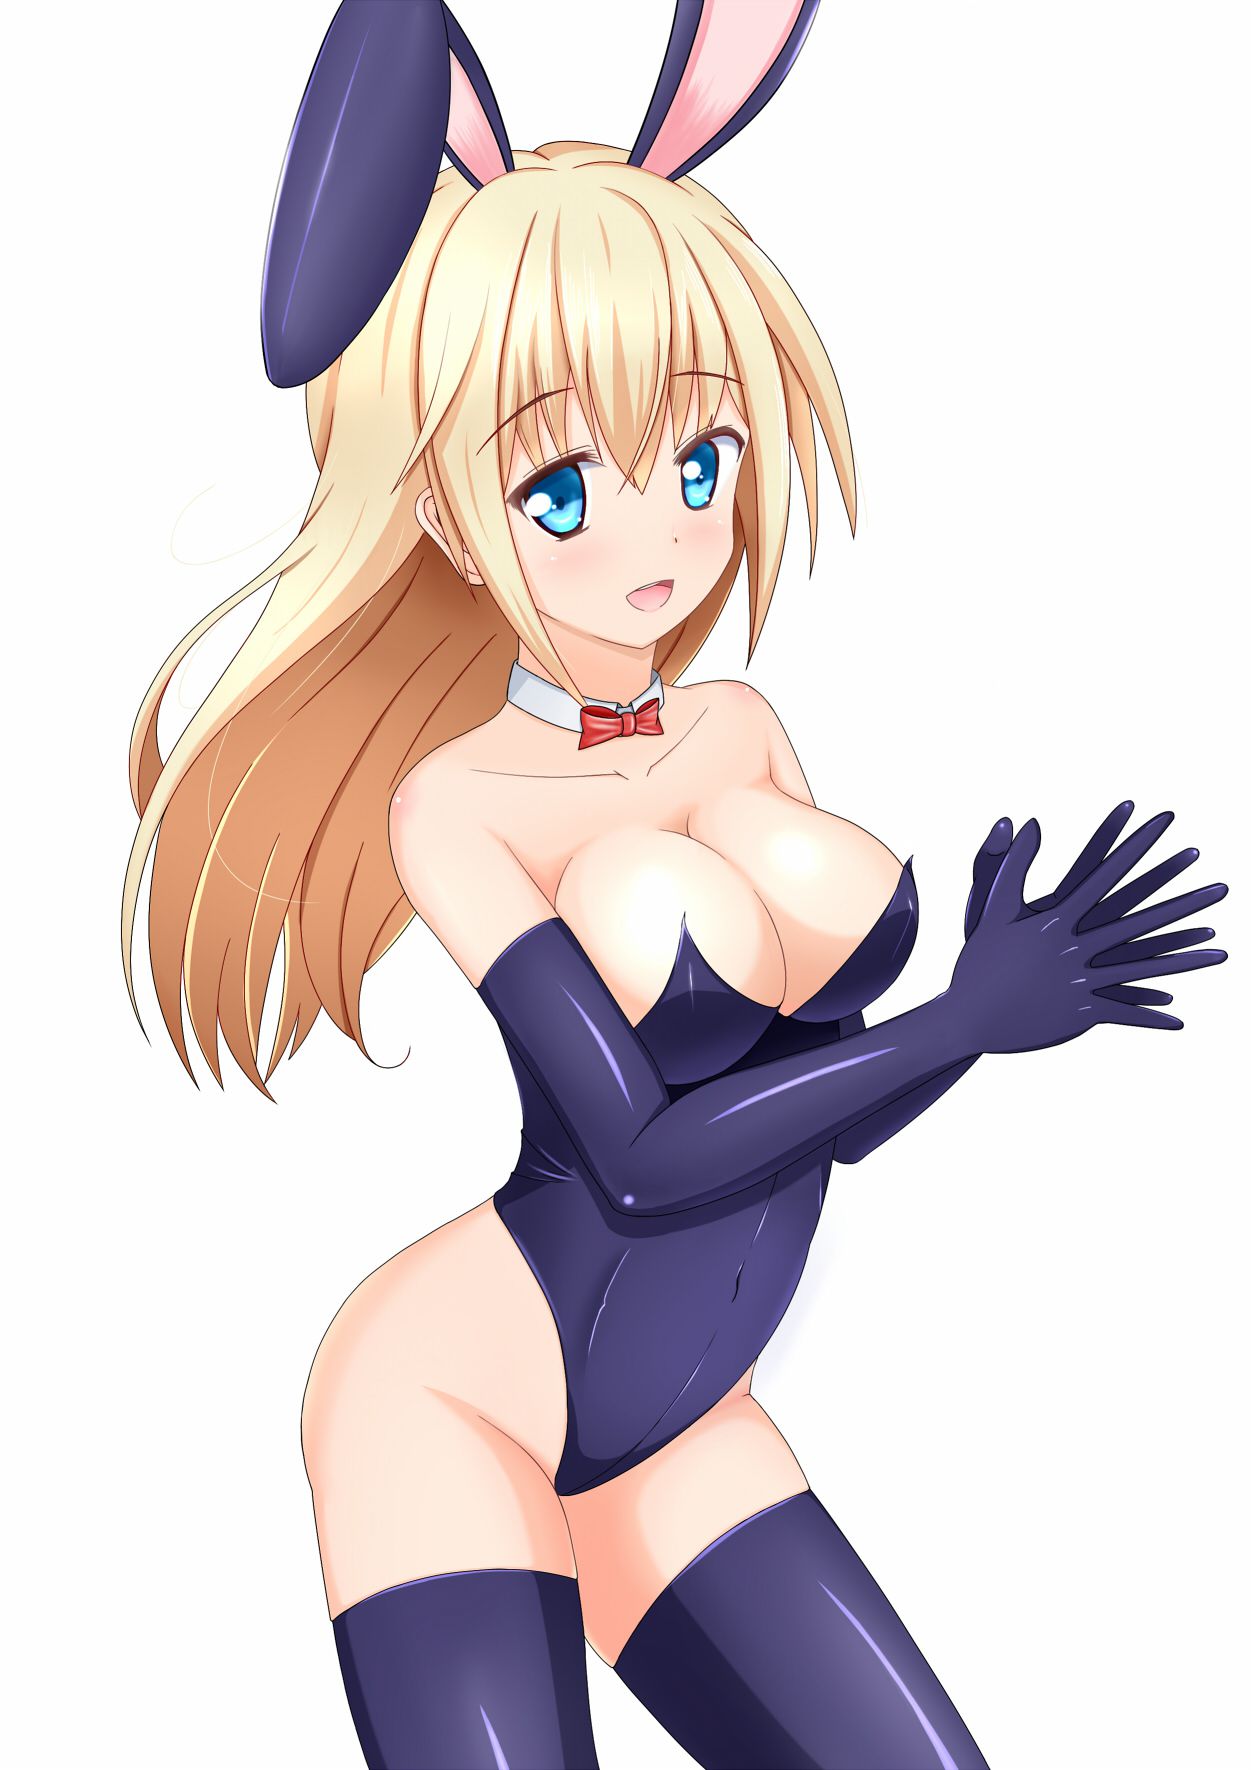 Elo Elo I want entertainment and Bunny girl daughter secondary image (; ° ∀ °) = 3 Mulher 22